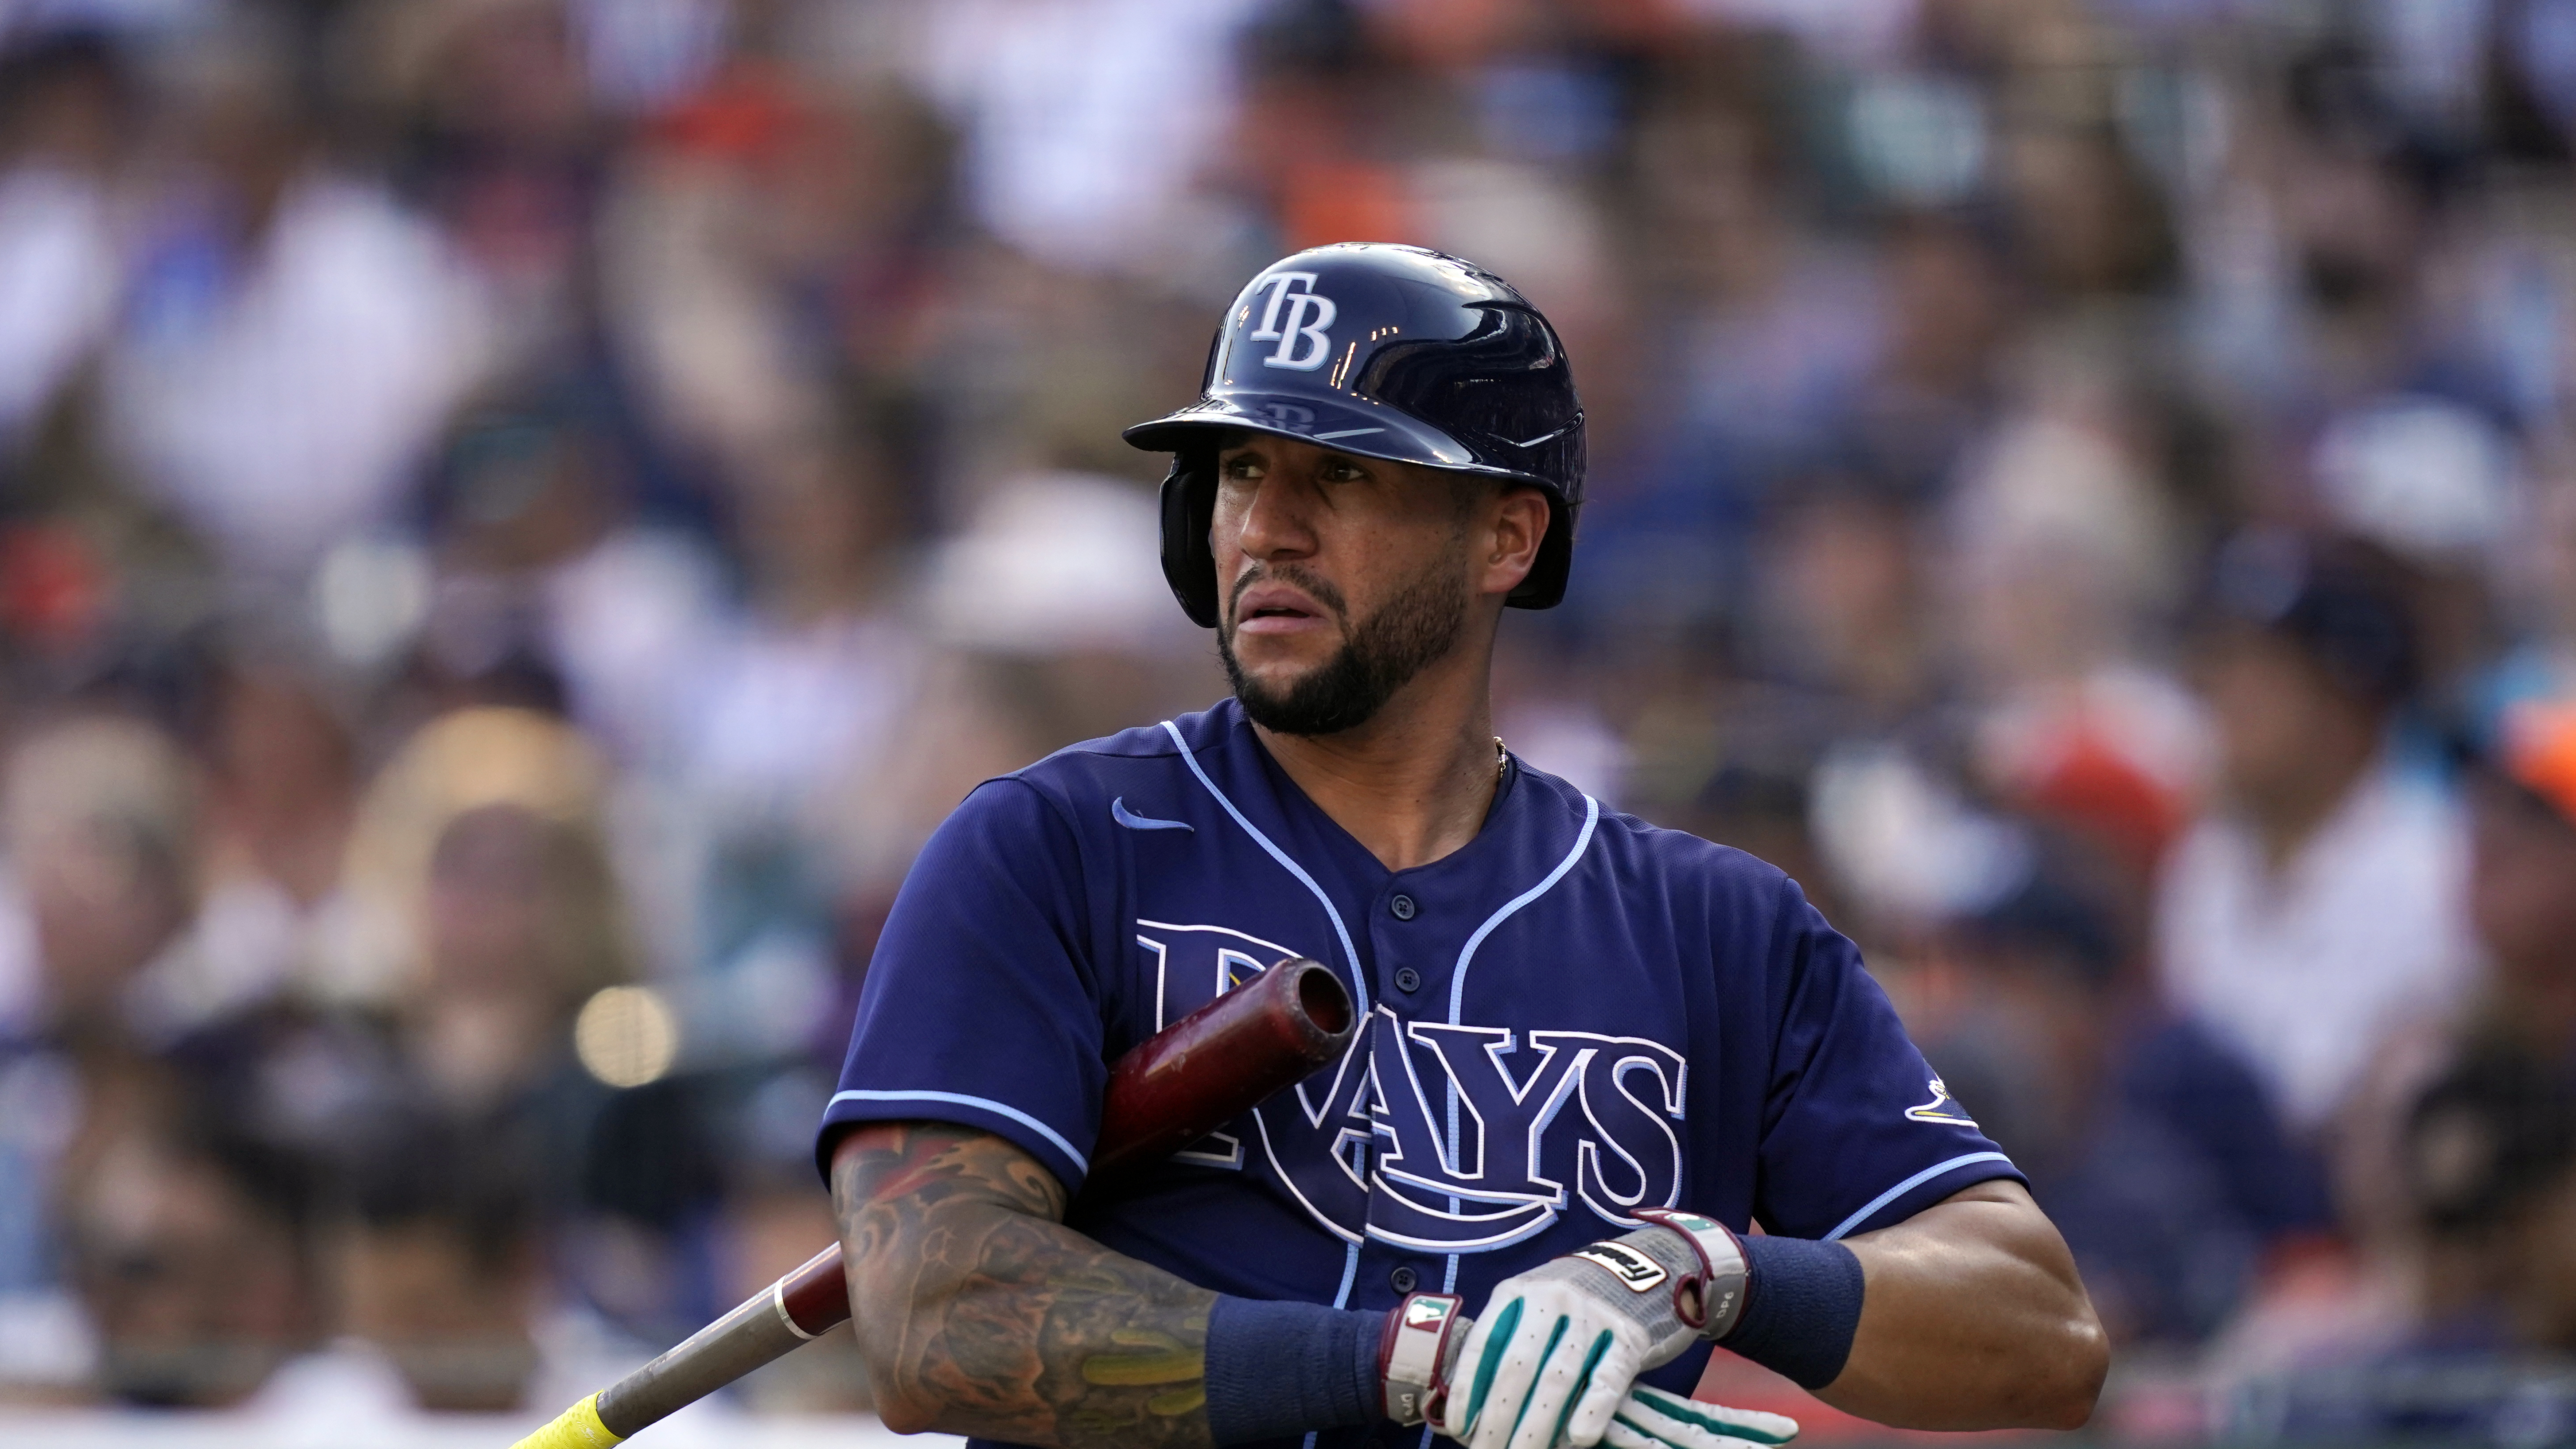 Rays' David Peralta at top of the lineup in matinee with Brewers